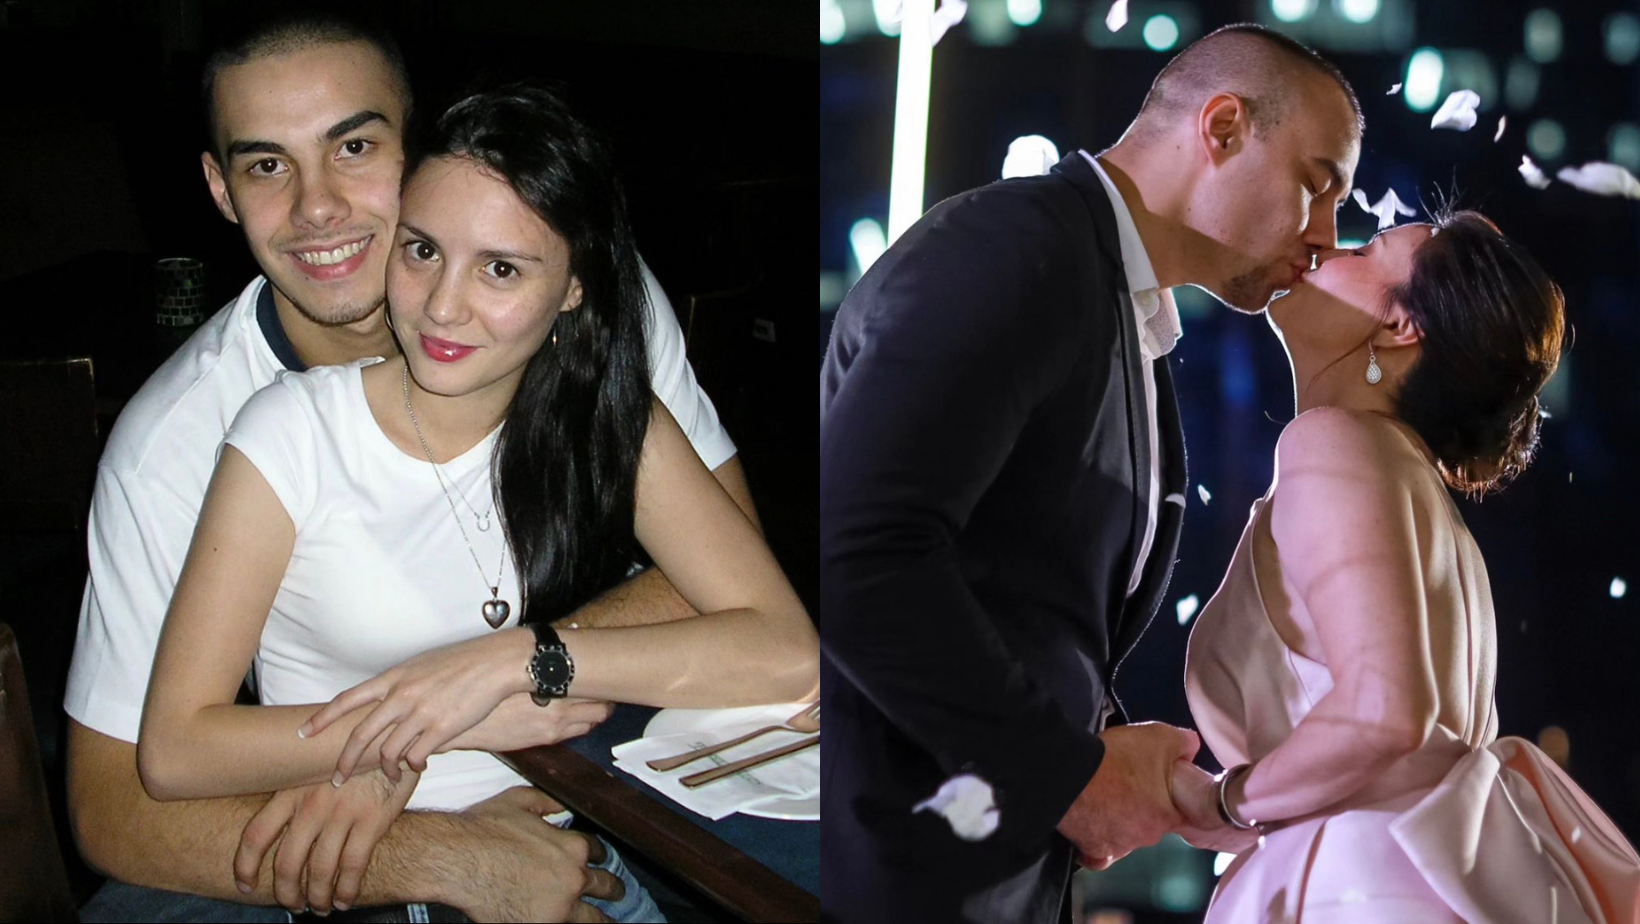 READ: Doug Kramer Celebrates 20 Years With Chesca Garcia With a Touching Post